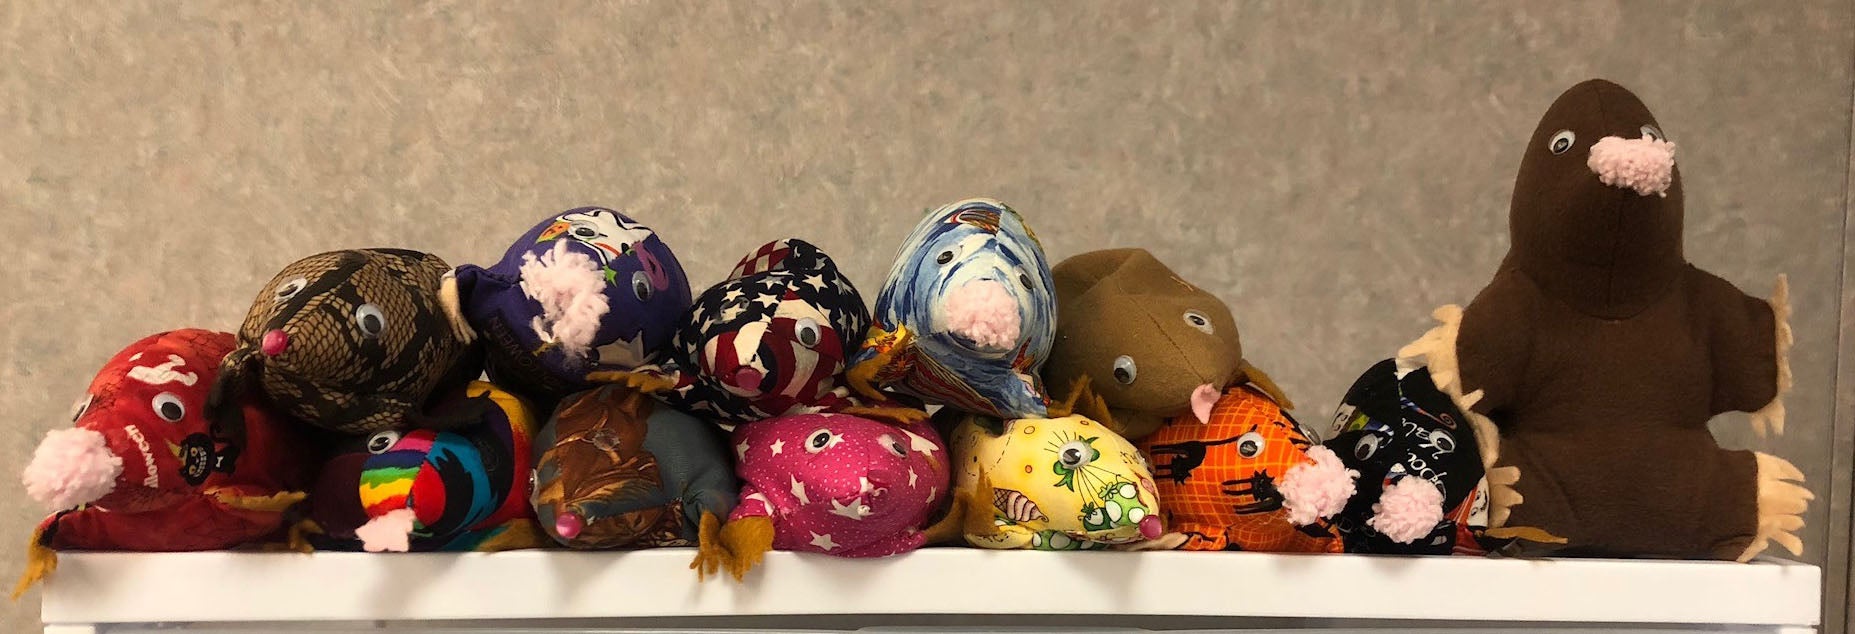 a photo of 13 stuffed moles of different patterns all on a shelf